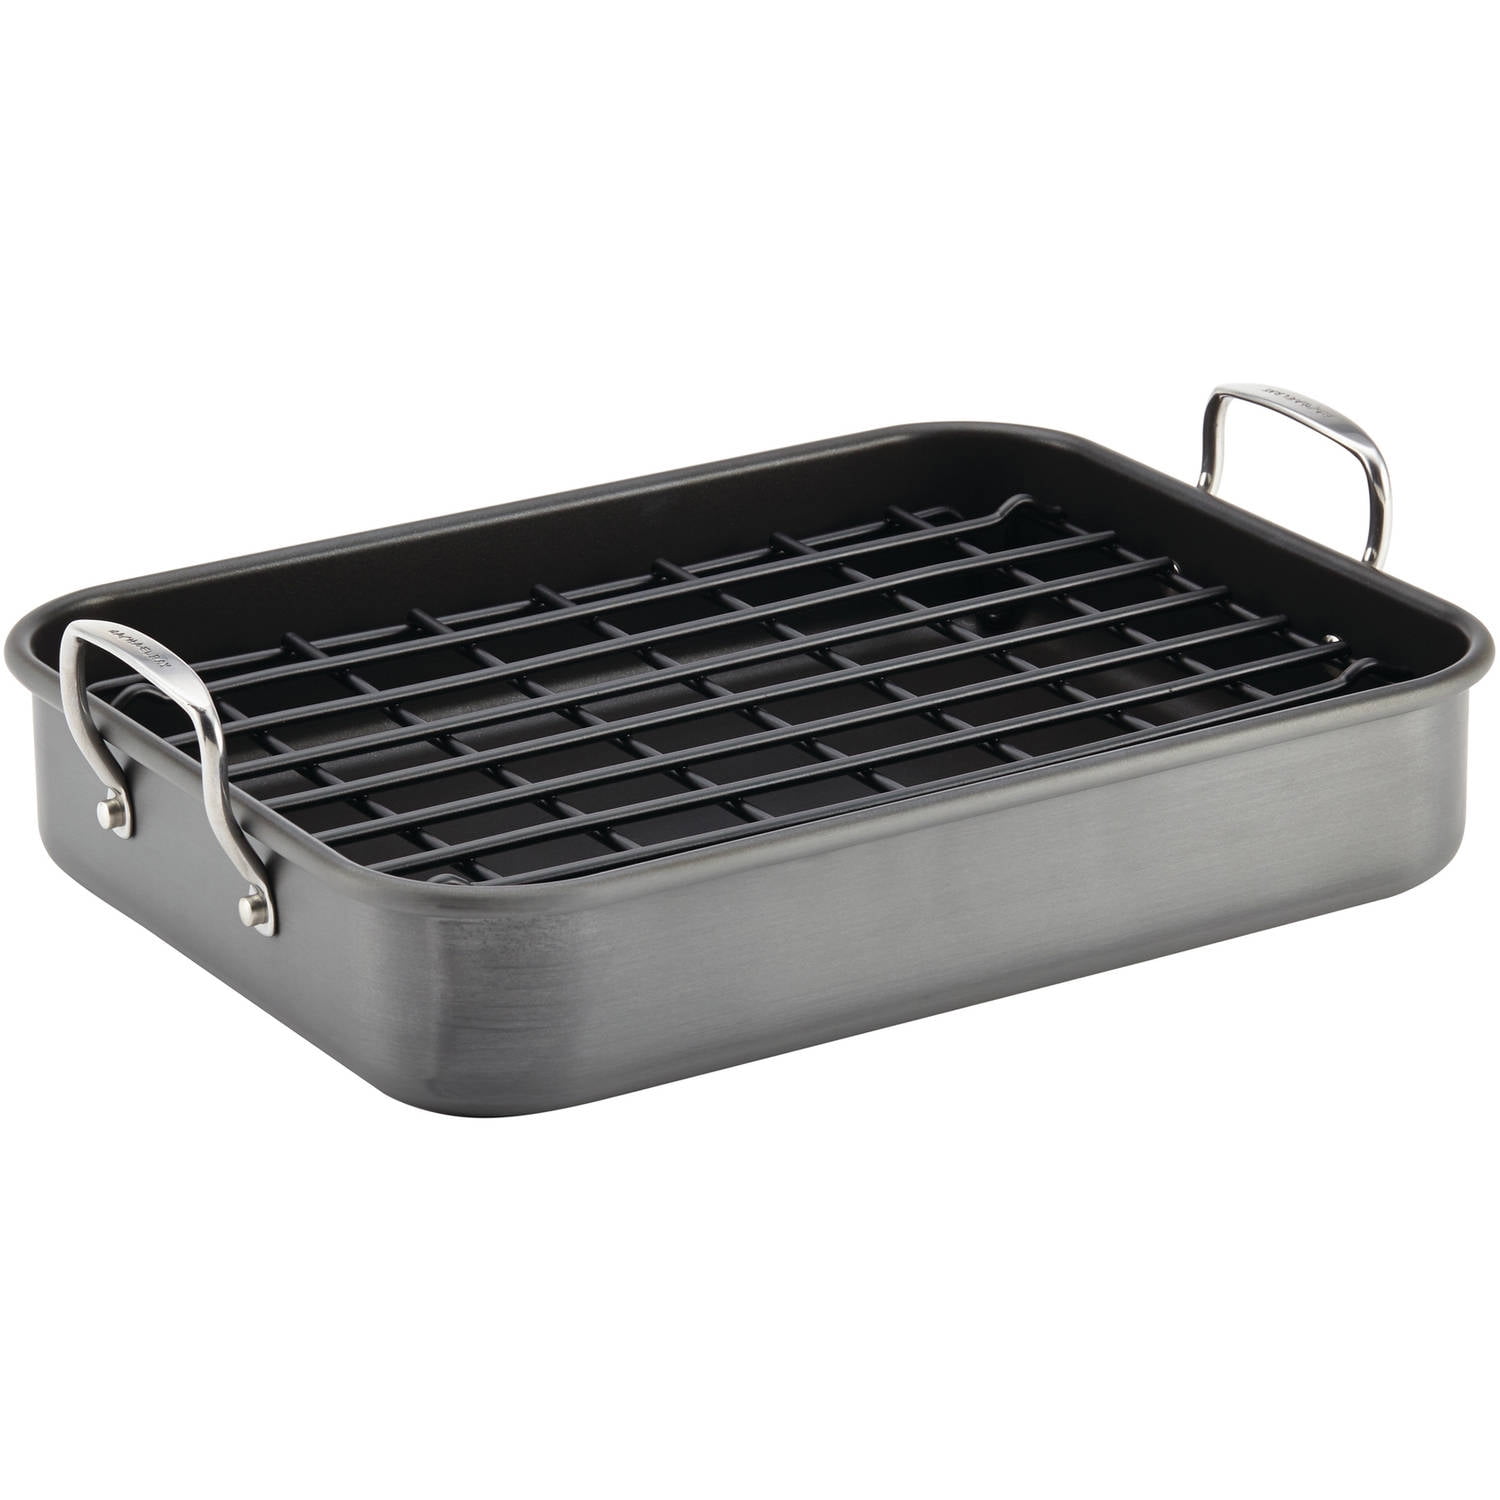 All-Clad e87599 Hard Anodized Aluminum Scratch Resistant Nonstick Anti-Warp Base 16-inch by 13-inch Large Roaster Roasting Pan